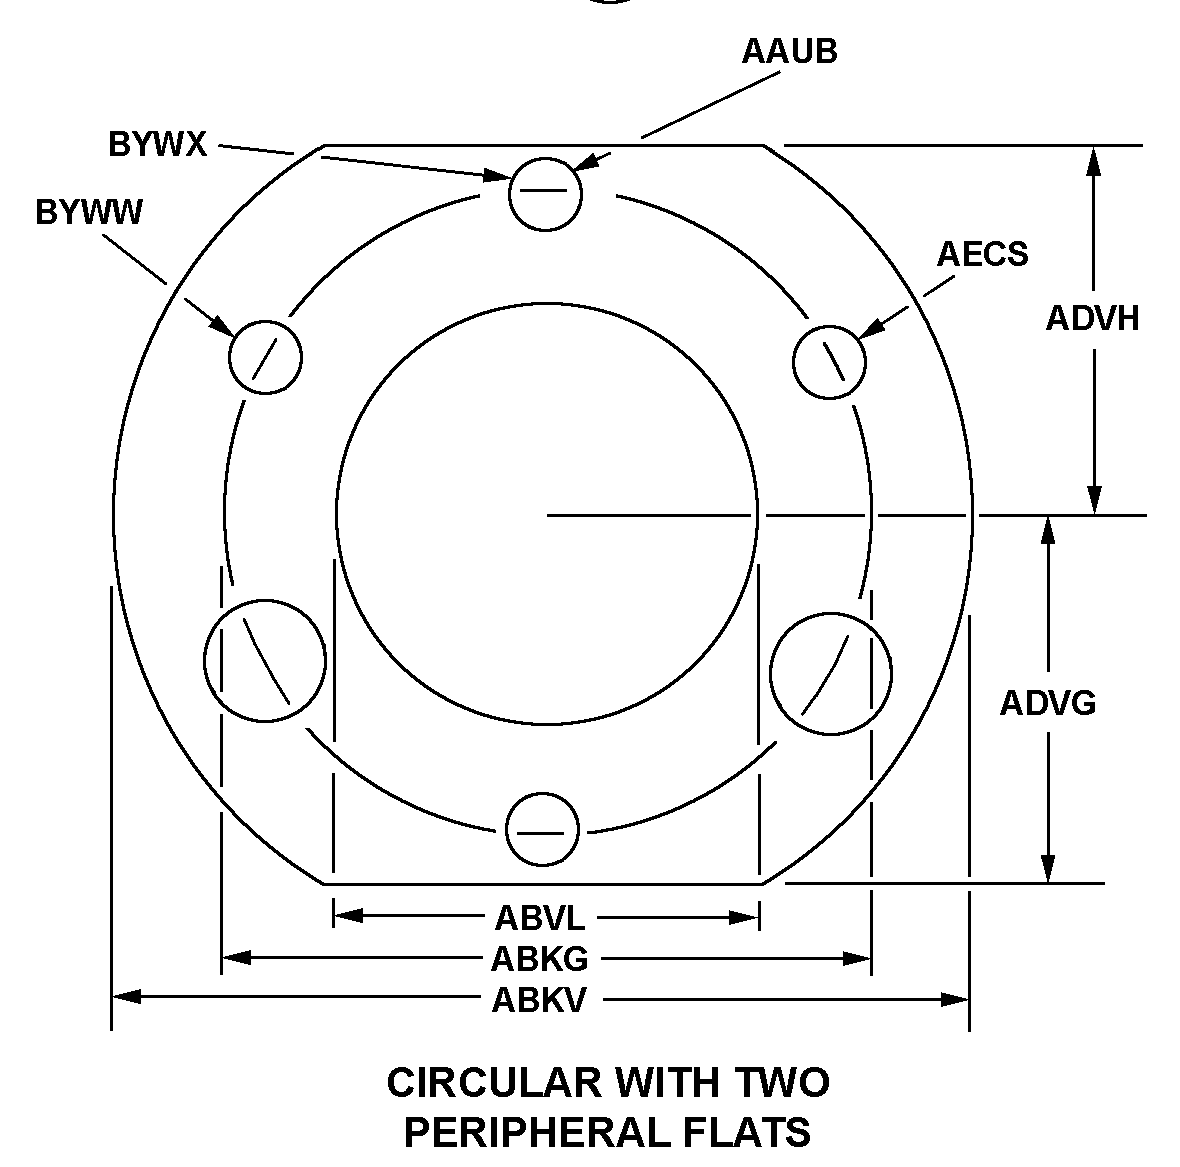 CIRCULAR WITH TWO PERIPHERAL FLATS style nsn 5330-00-564-2529